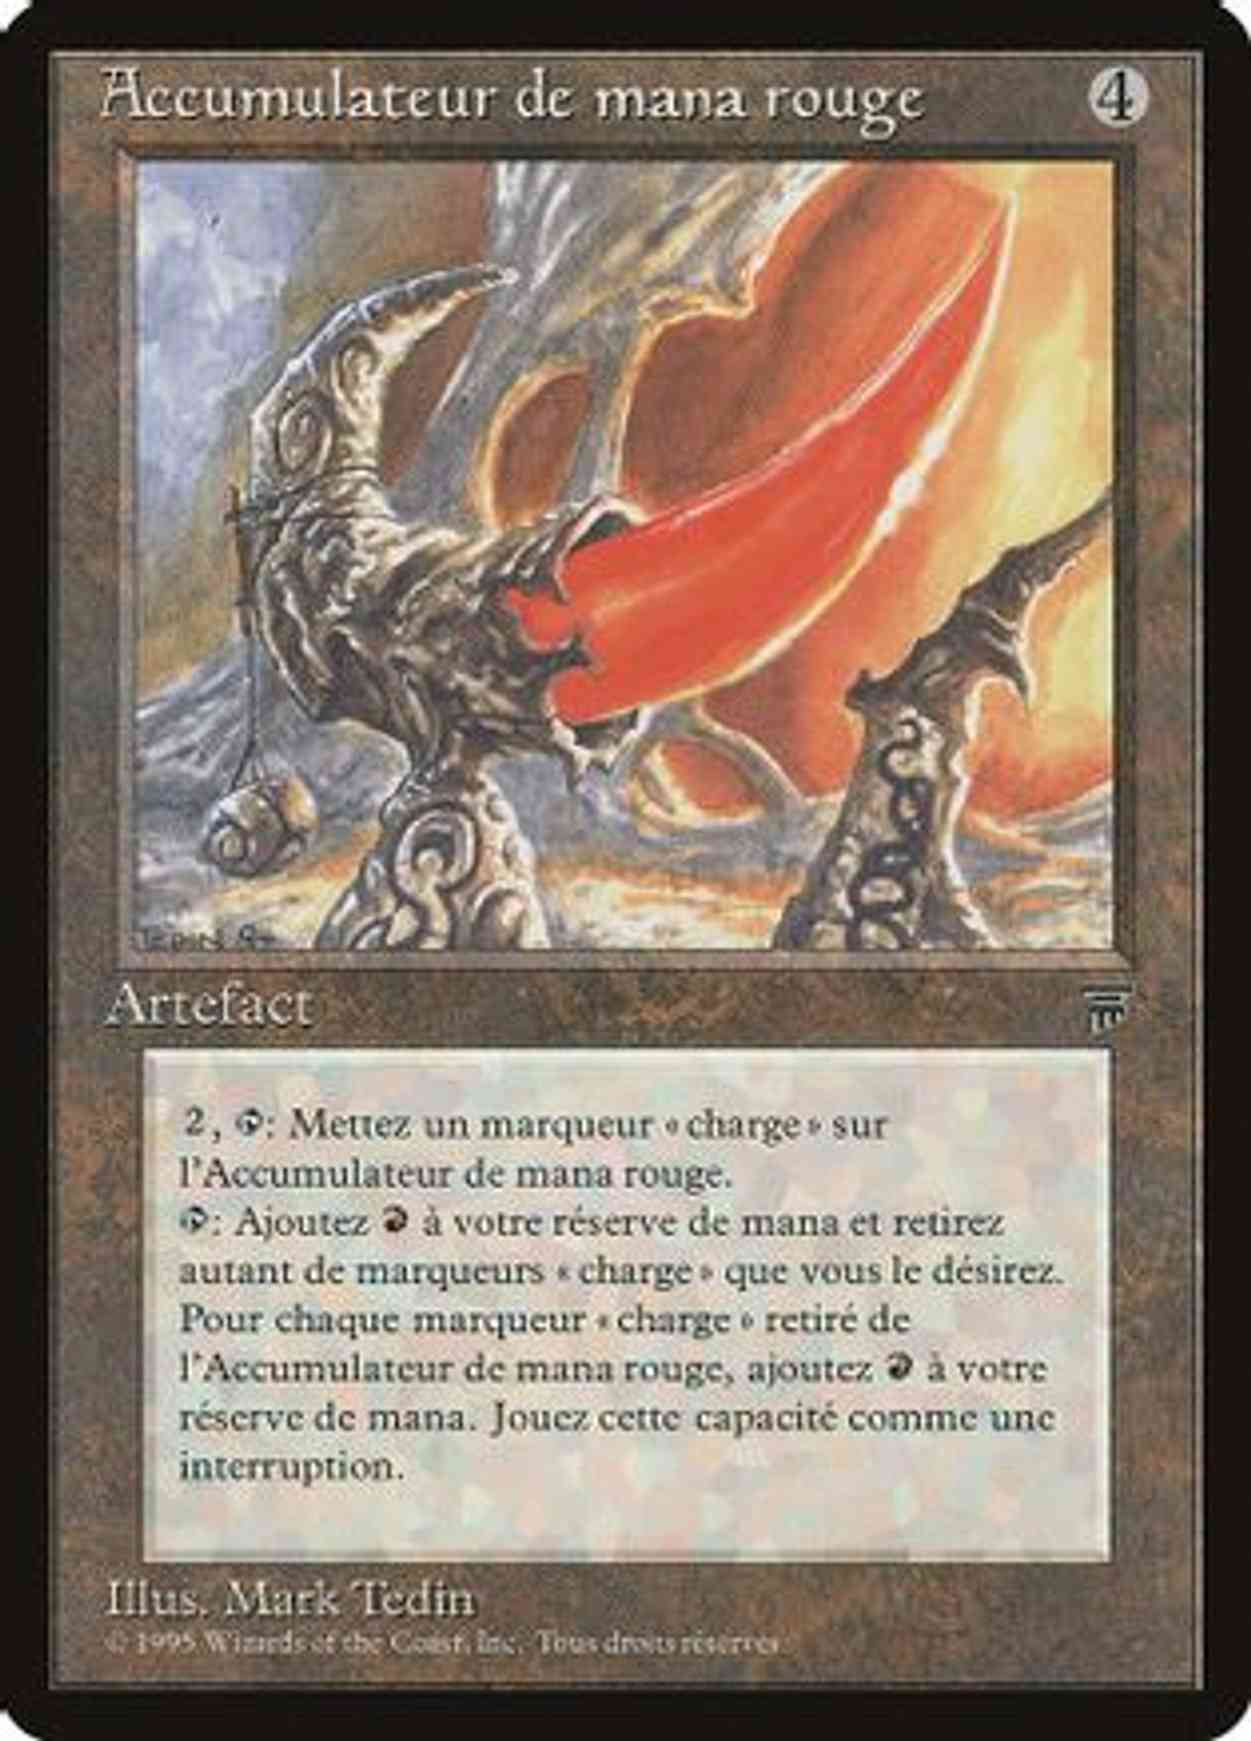 Red Mana Battery (French) - "Accumulateur de mana rogue" magic card front